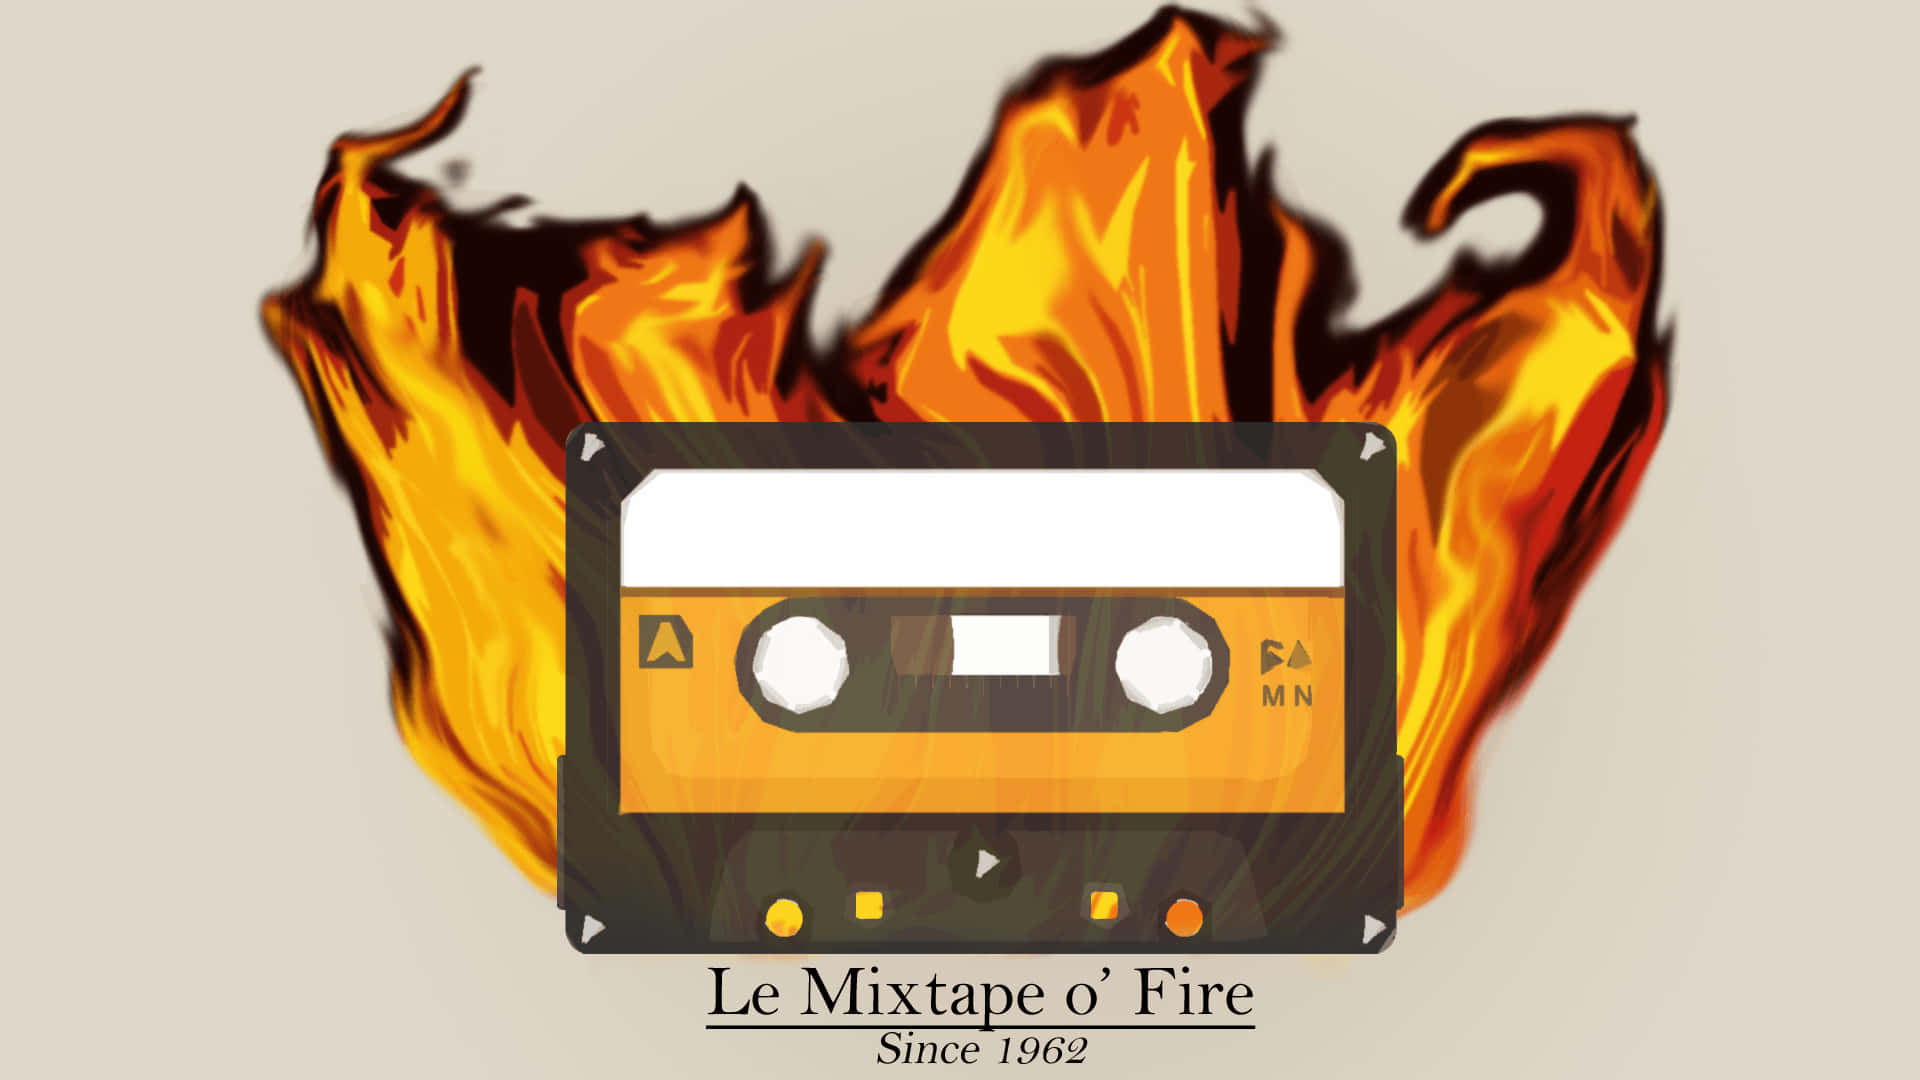 Download the latest Mixtape to enjoy songs from popular artists